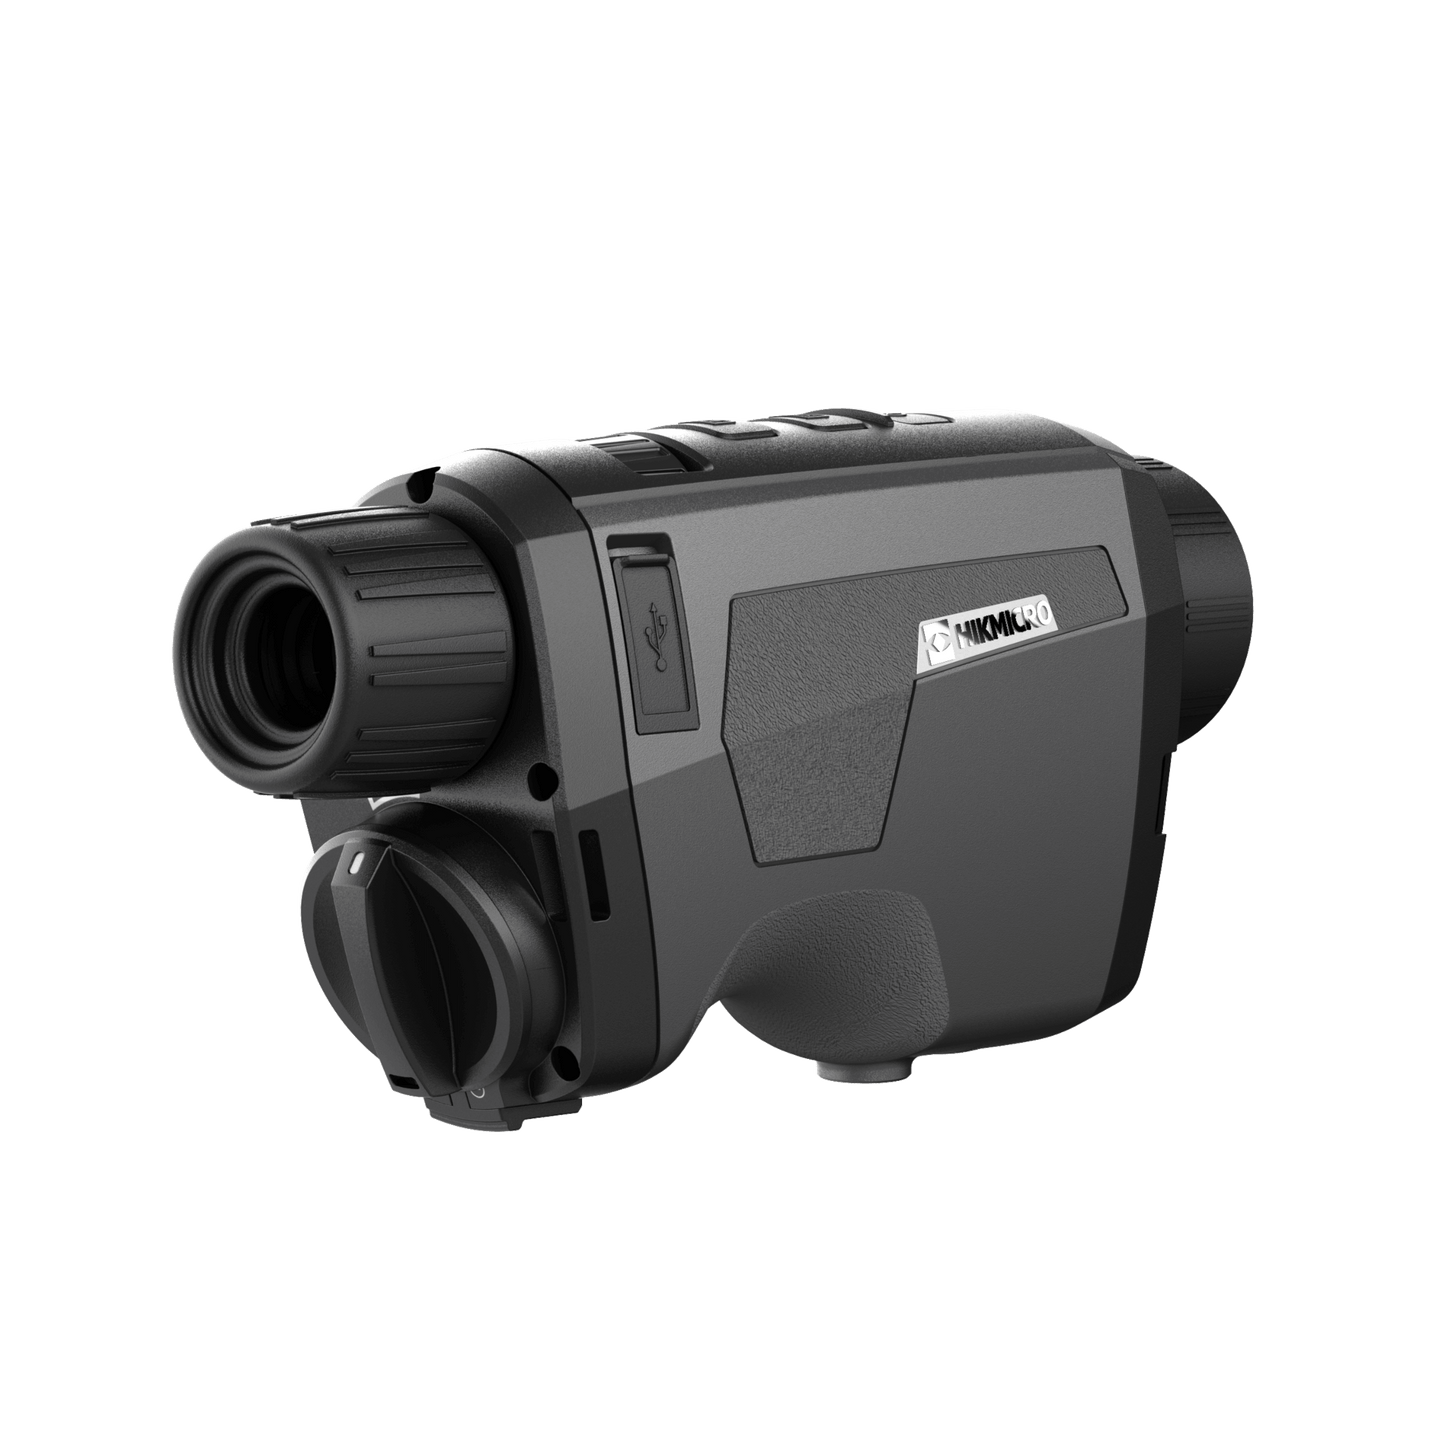 Cape Thermal imaging monocular for sale - HikMicro Gryphon GH35L Handheld thermal monocular rear right view without eye piece